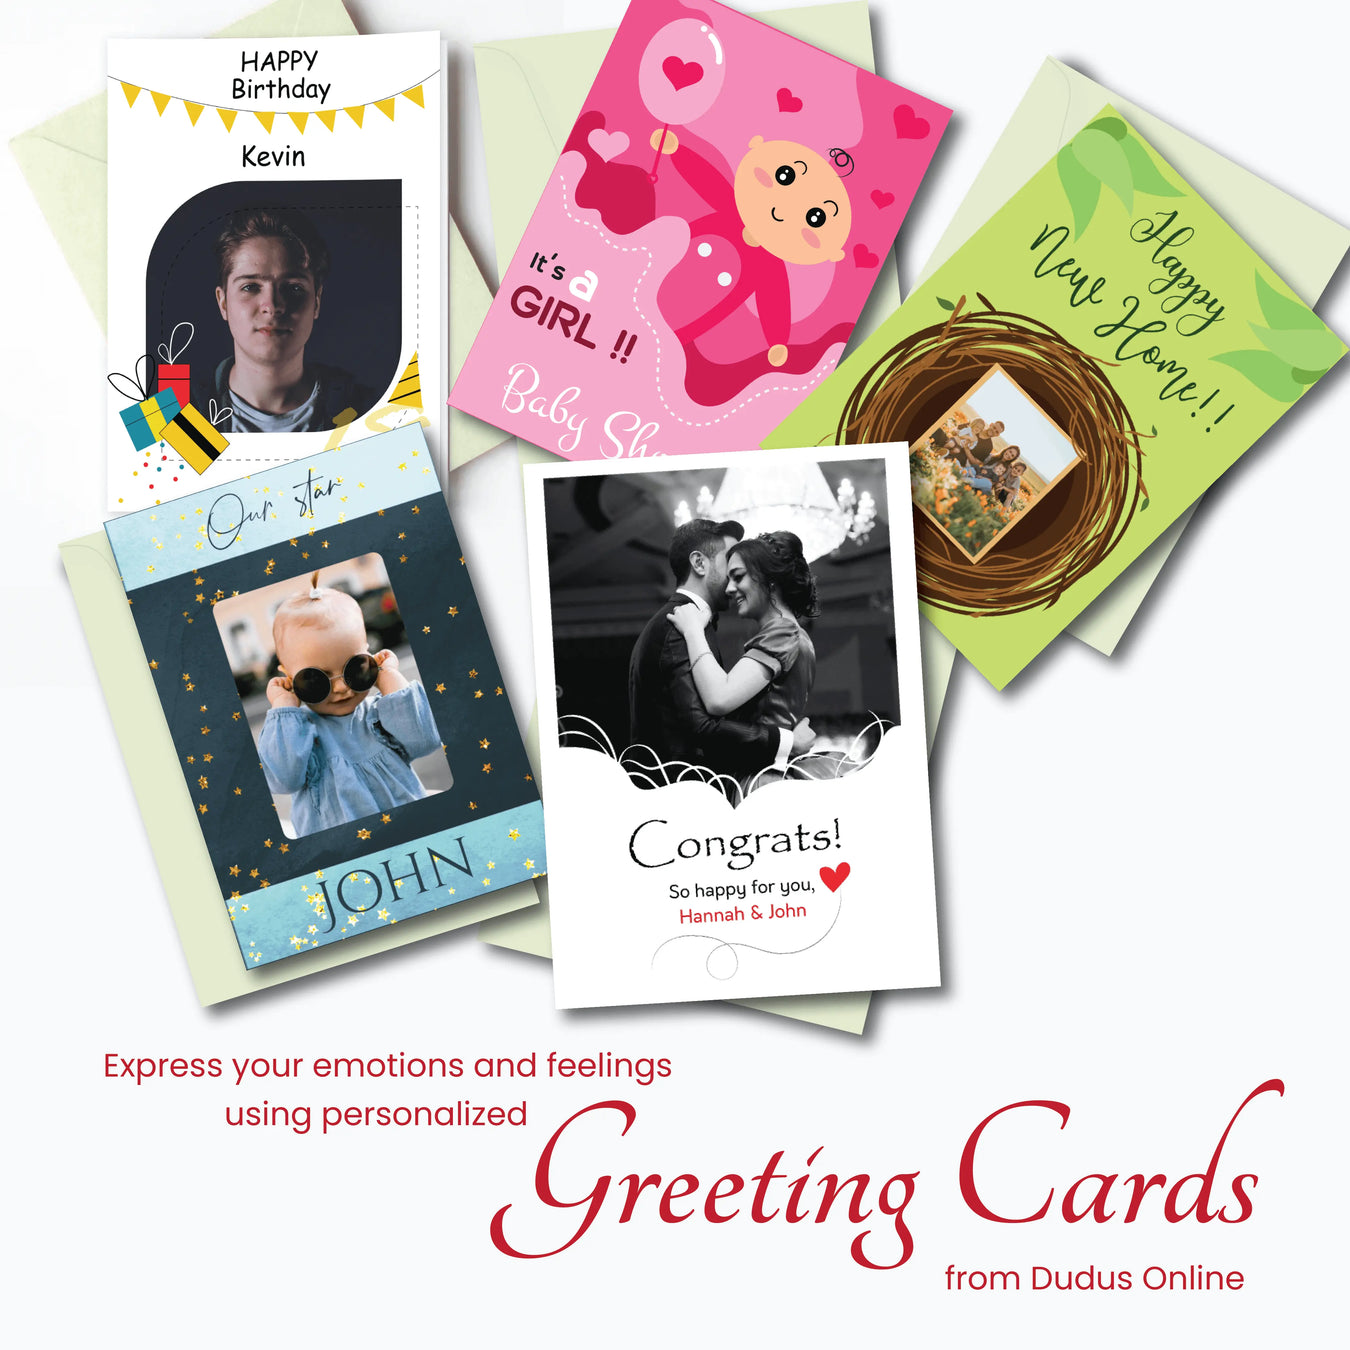 Shop greeting cards by Dudus Online